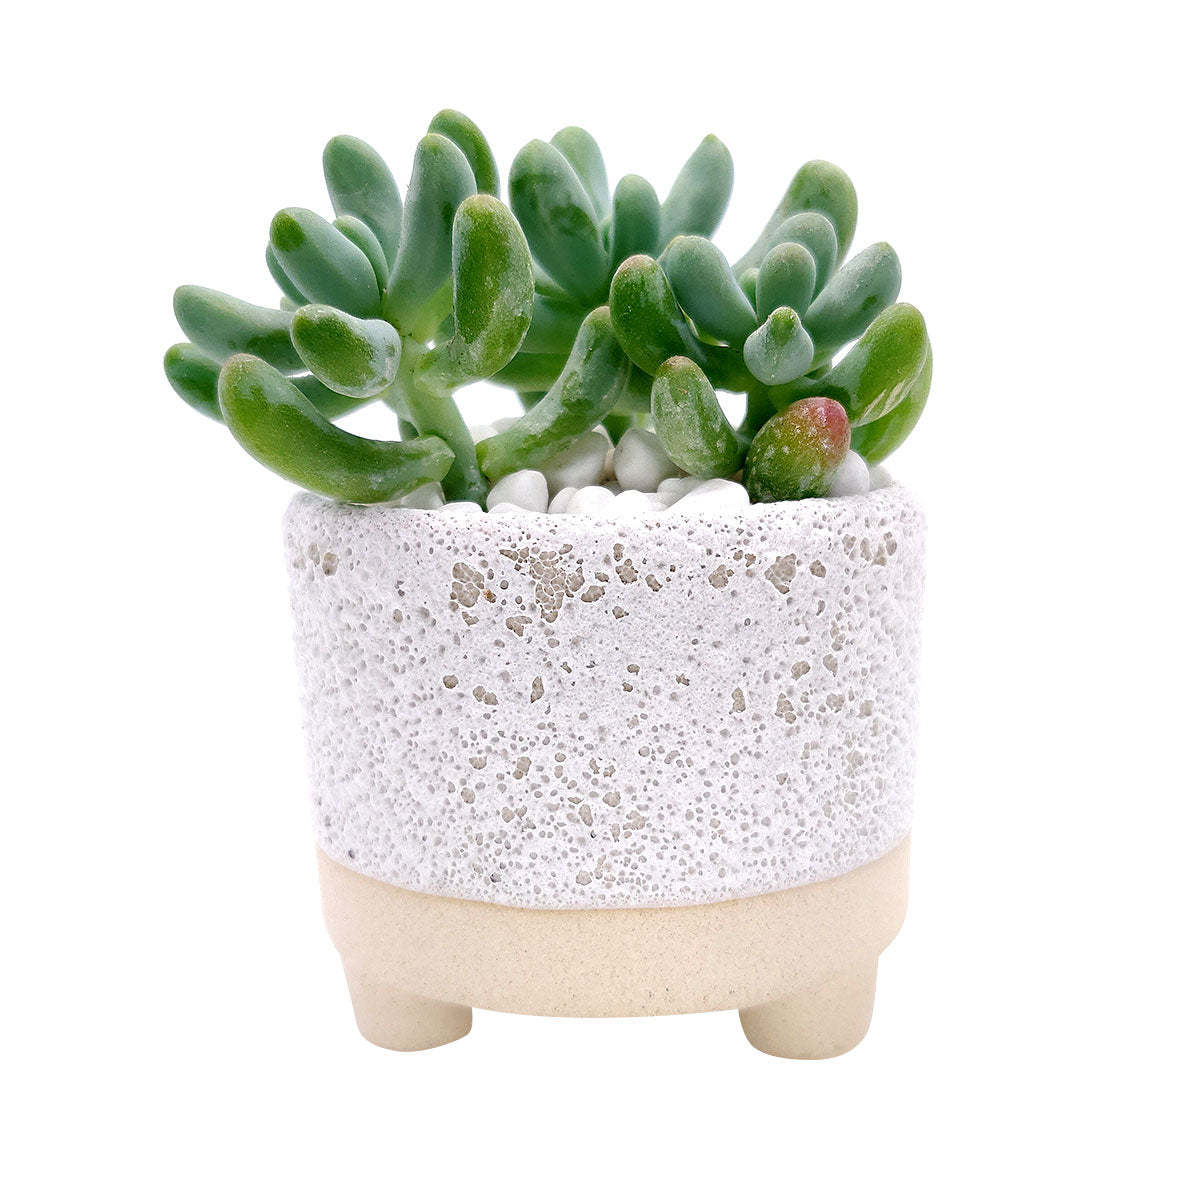 2 inch Bubbled Ceramic Footed Pot for sale, Mini pot for succulent, Succulent pot decor ideas, 2 inch size pot for succulents, Flower pot for sale, ceramic pots for planting